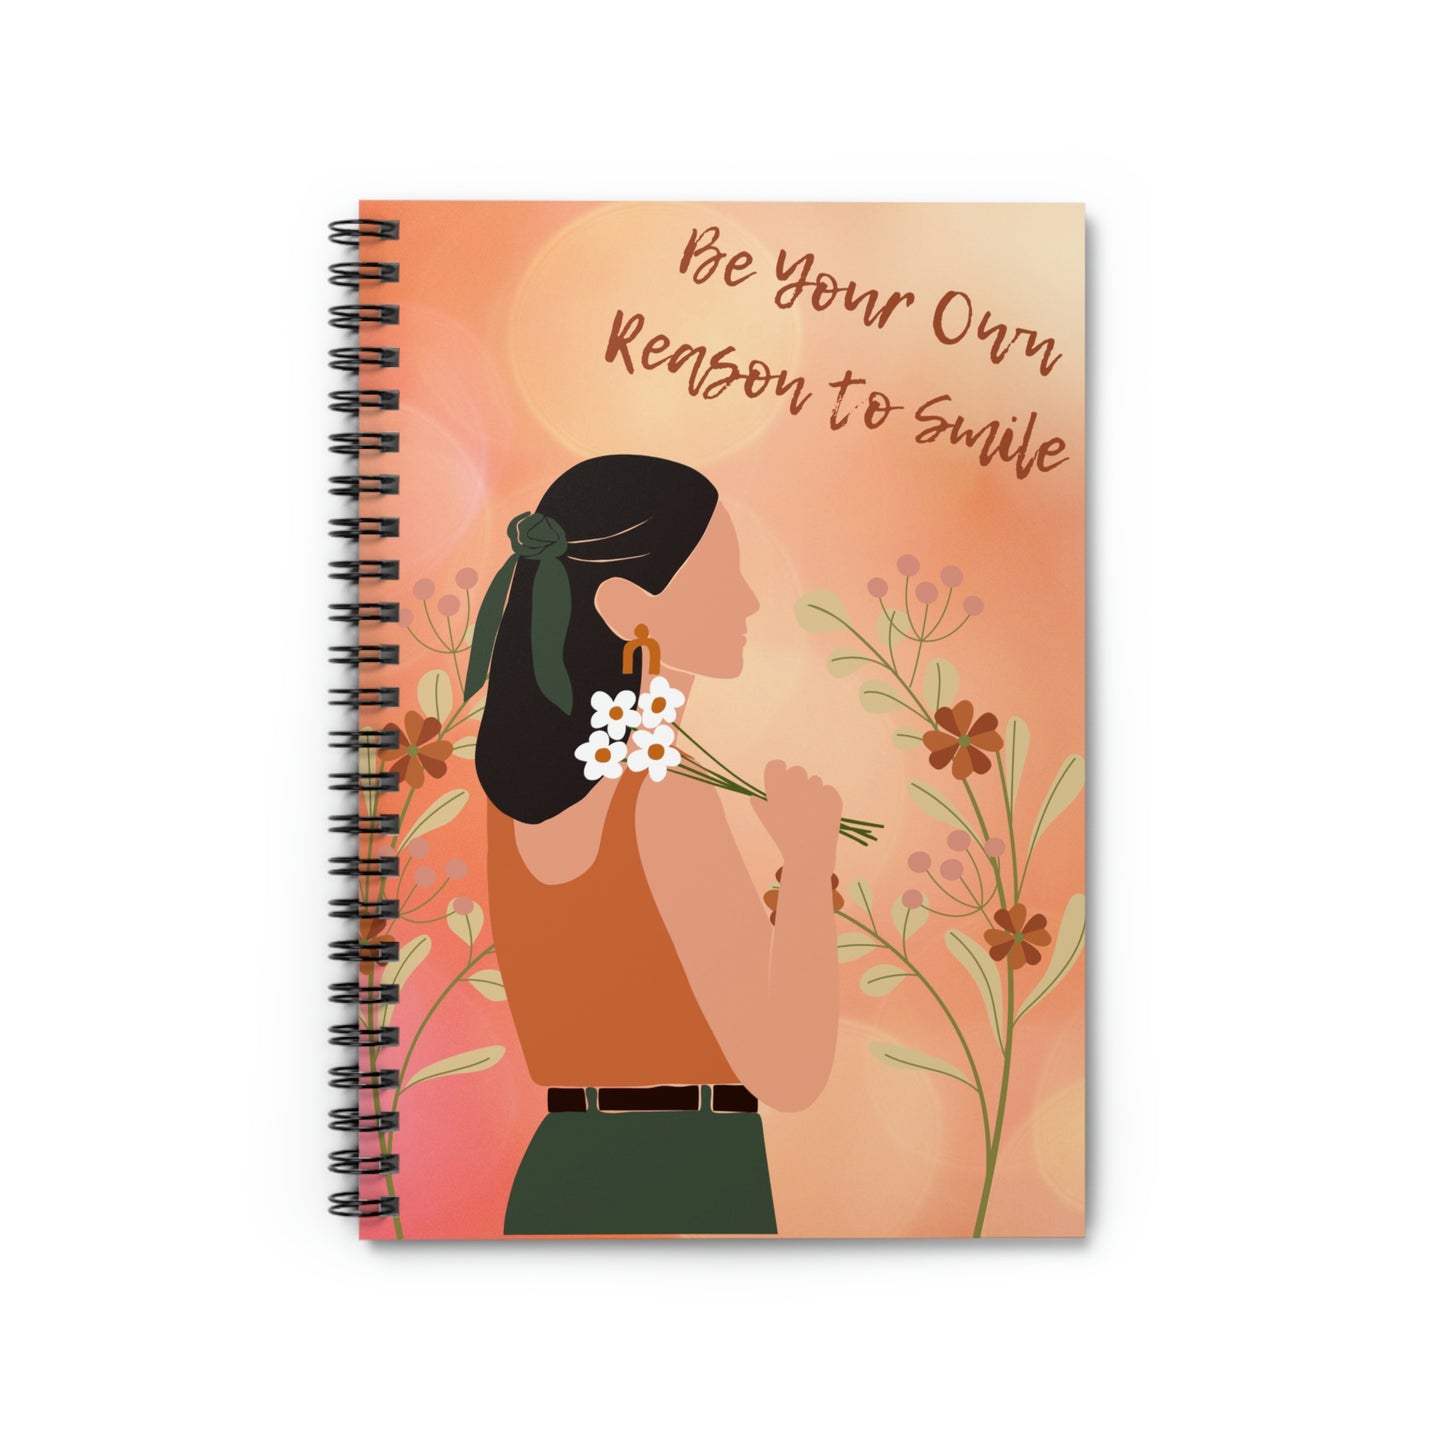 Be Your Own Reason 2 Spiral Notebook/Journal